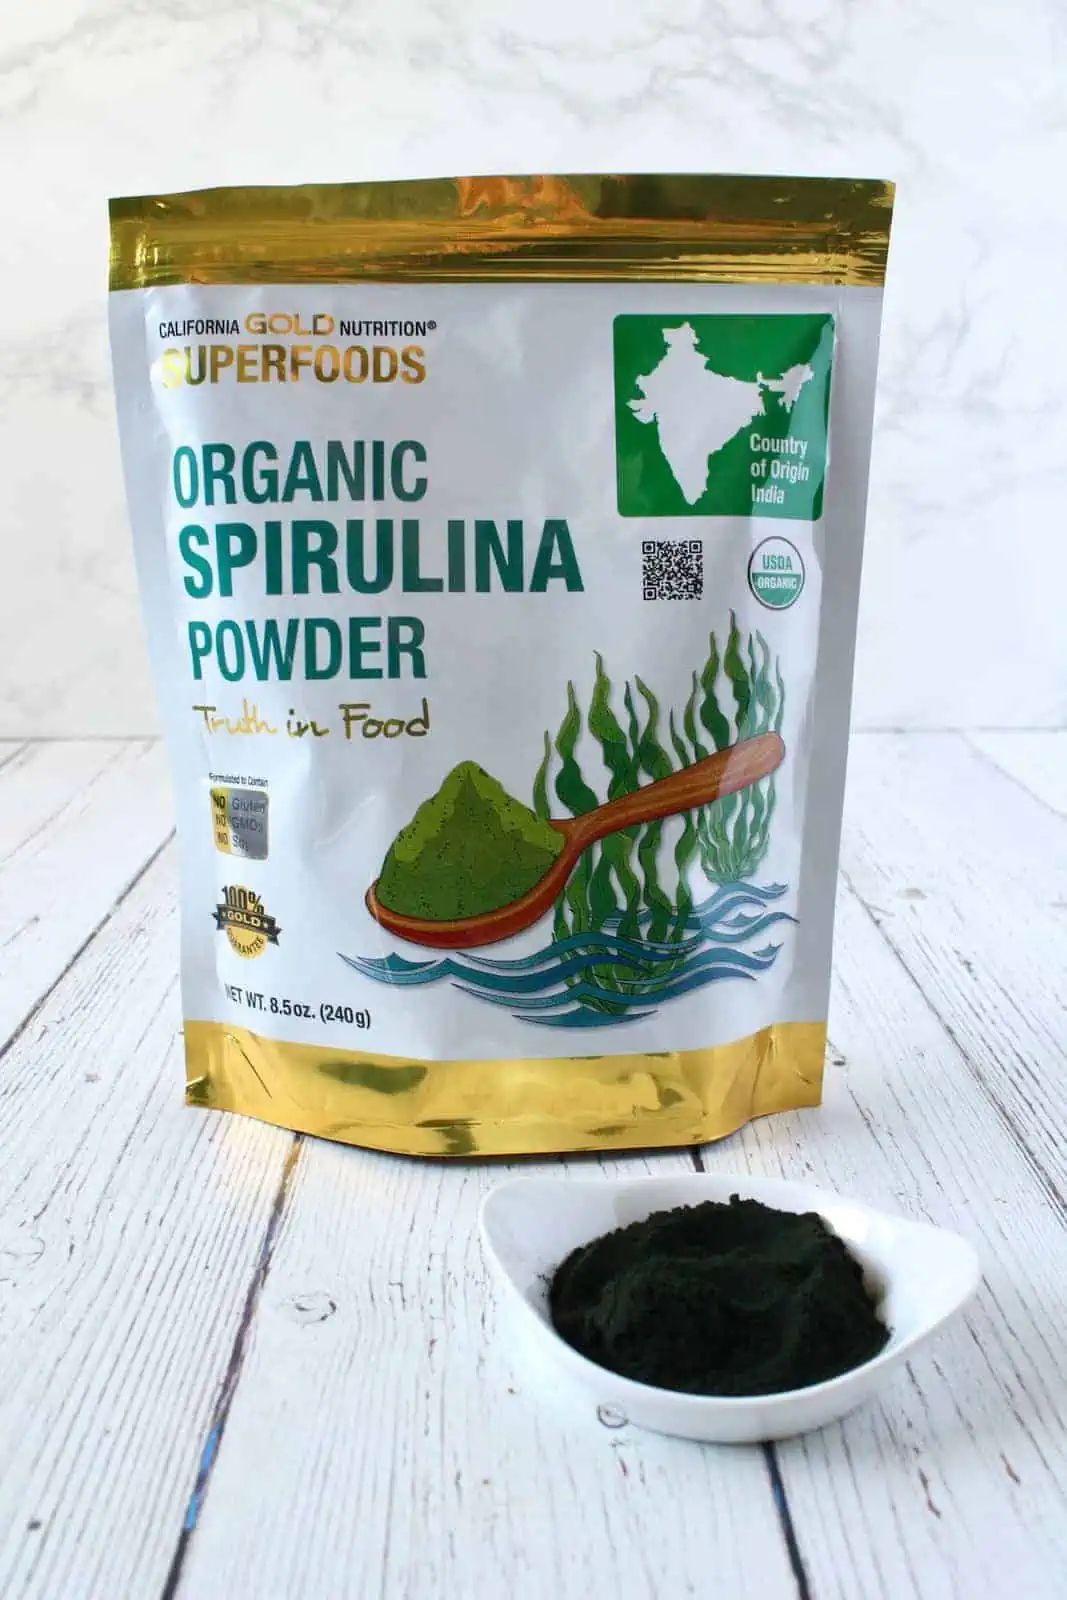 White and gold bag of organic spirulina powder next to a small white dish with dark green powder in it on a white wooden surface with a white marble background